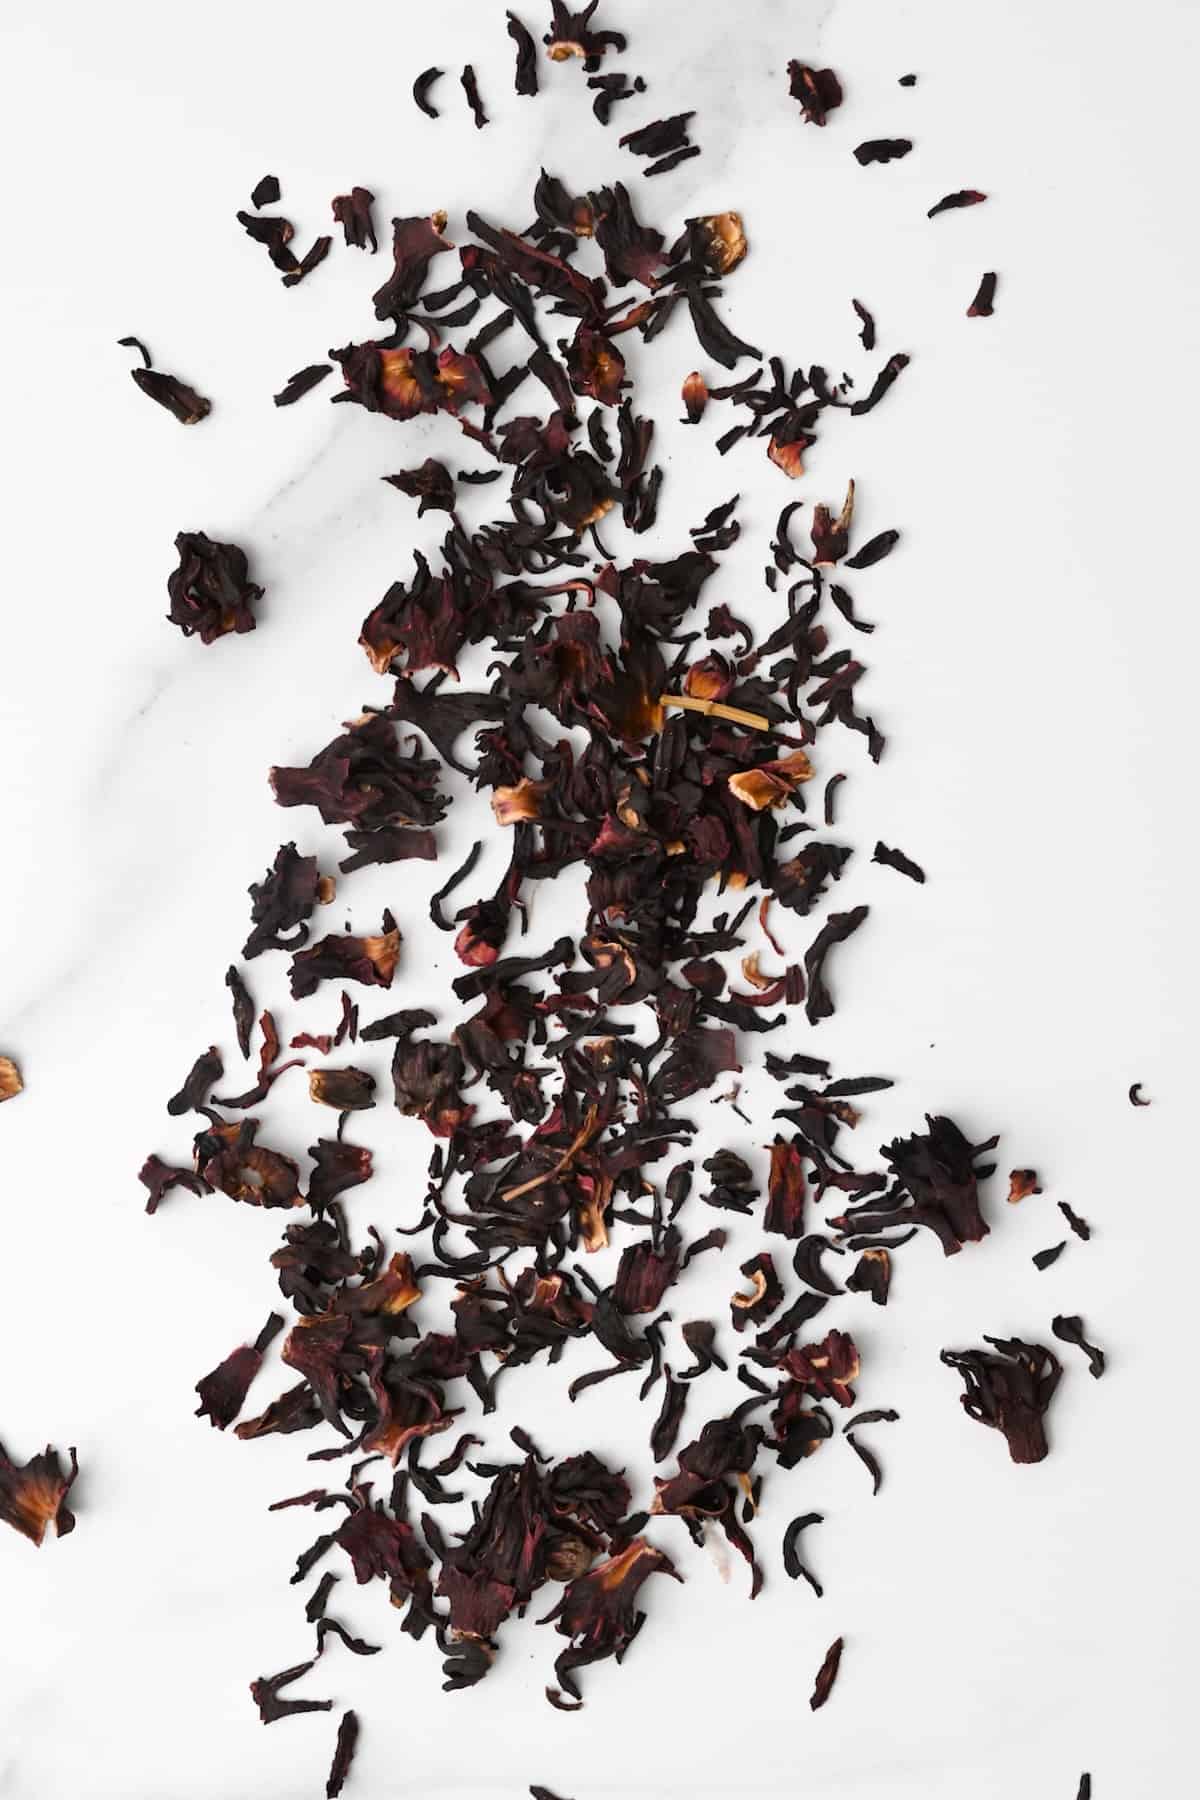 Dried hibiscus leaves spread on a flat surface